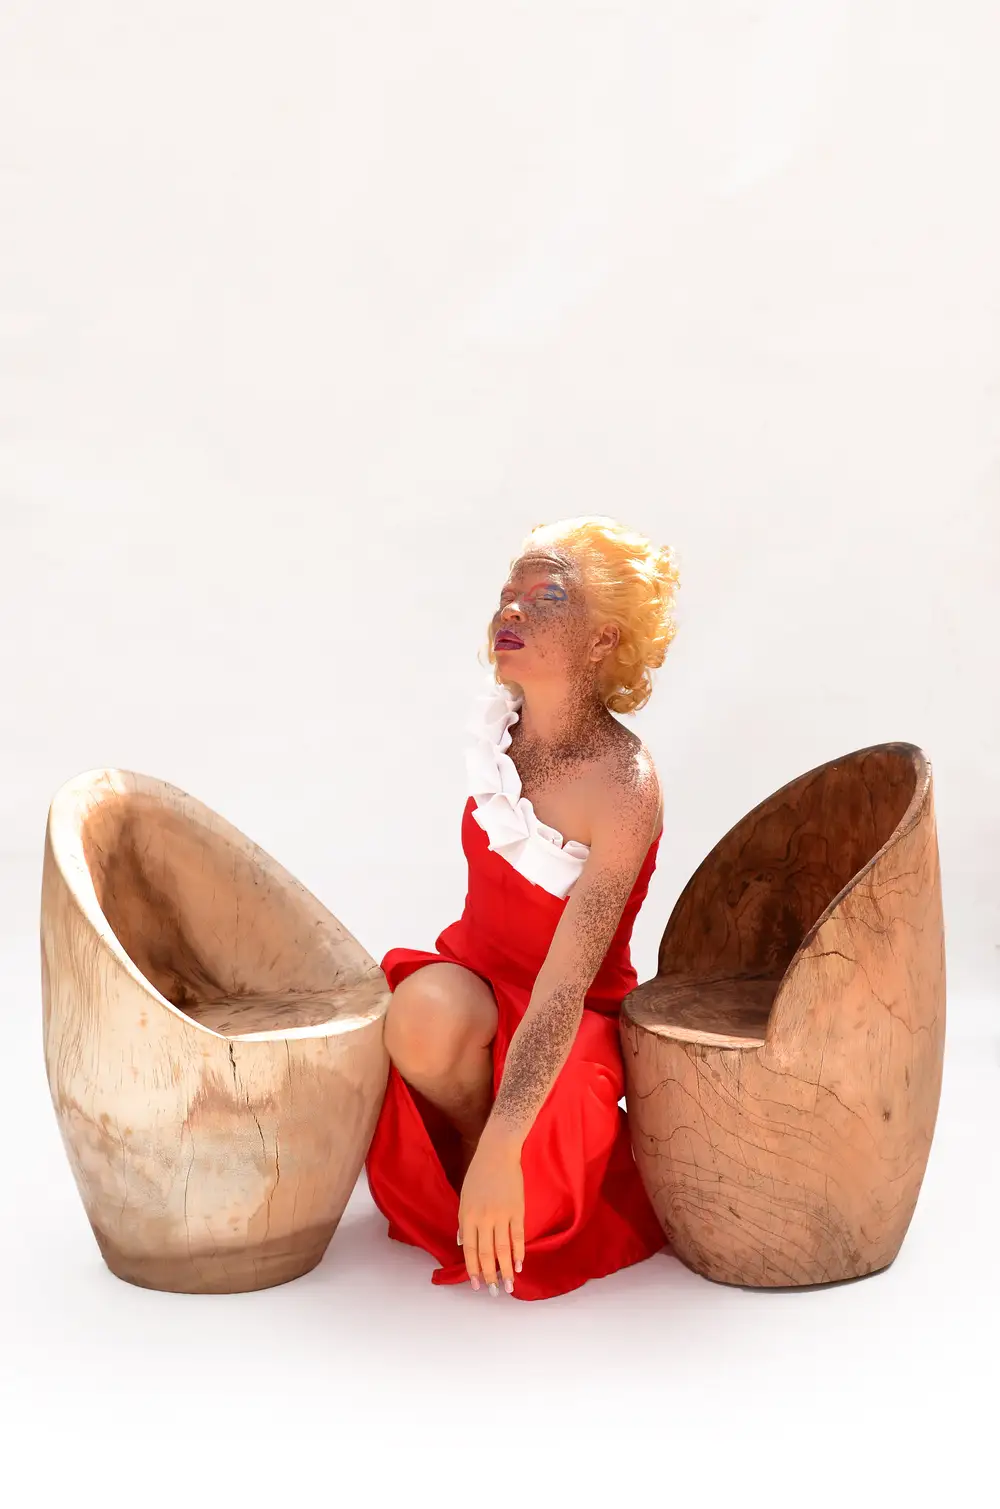 Lady sitting between two wooden chairs